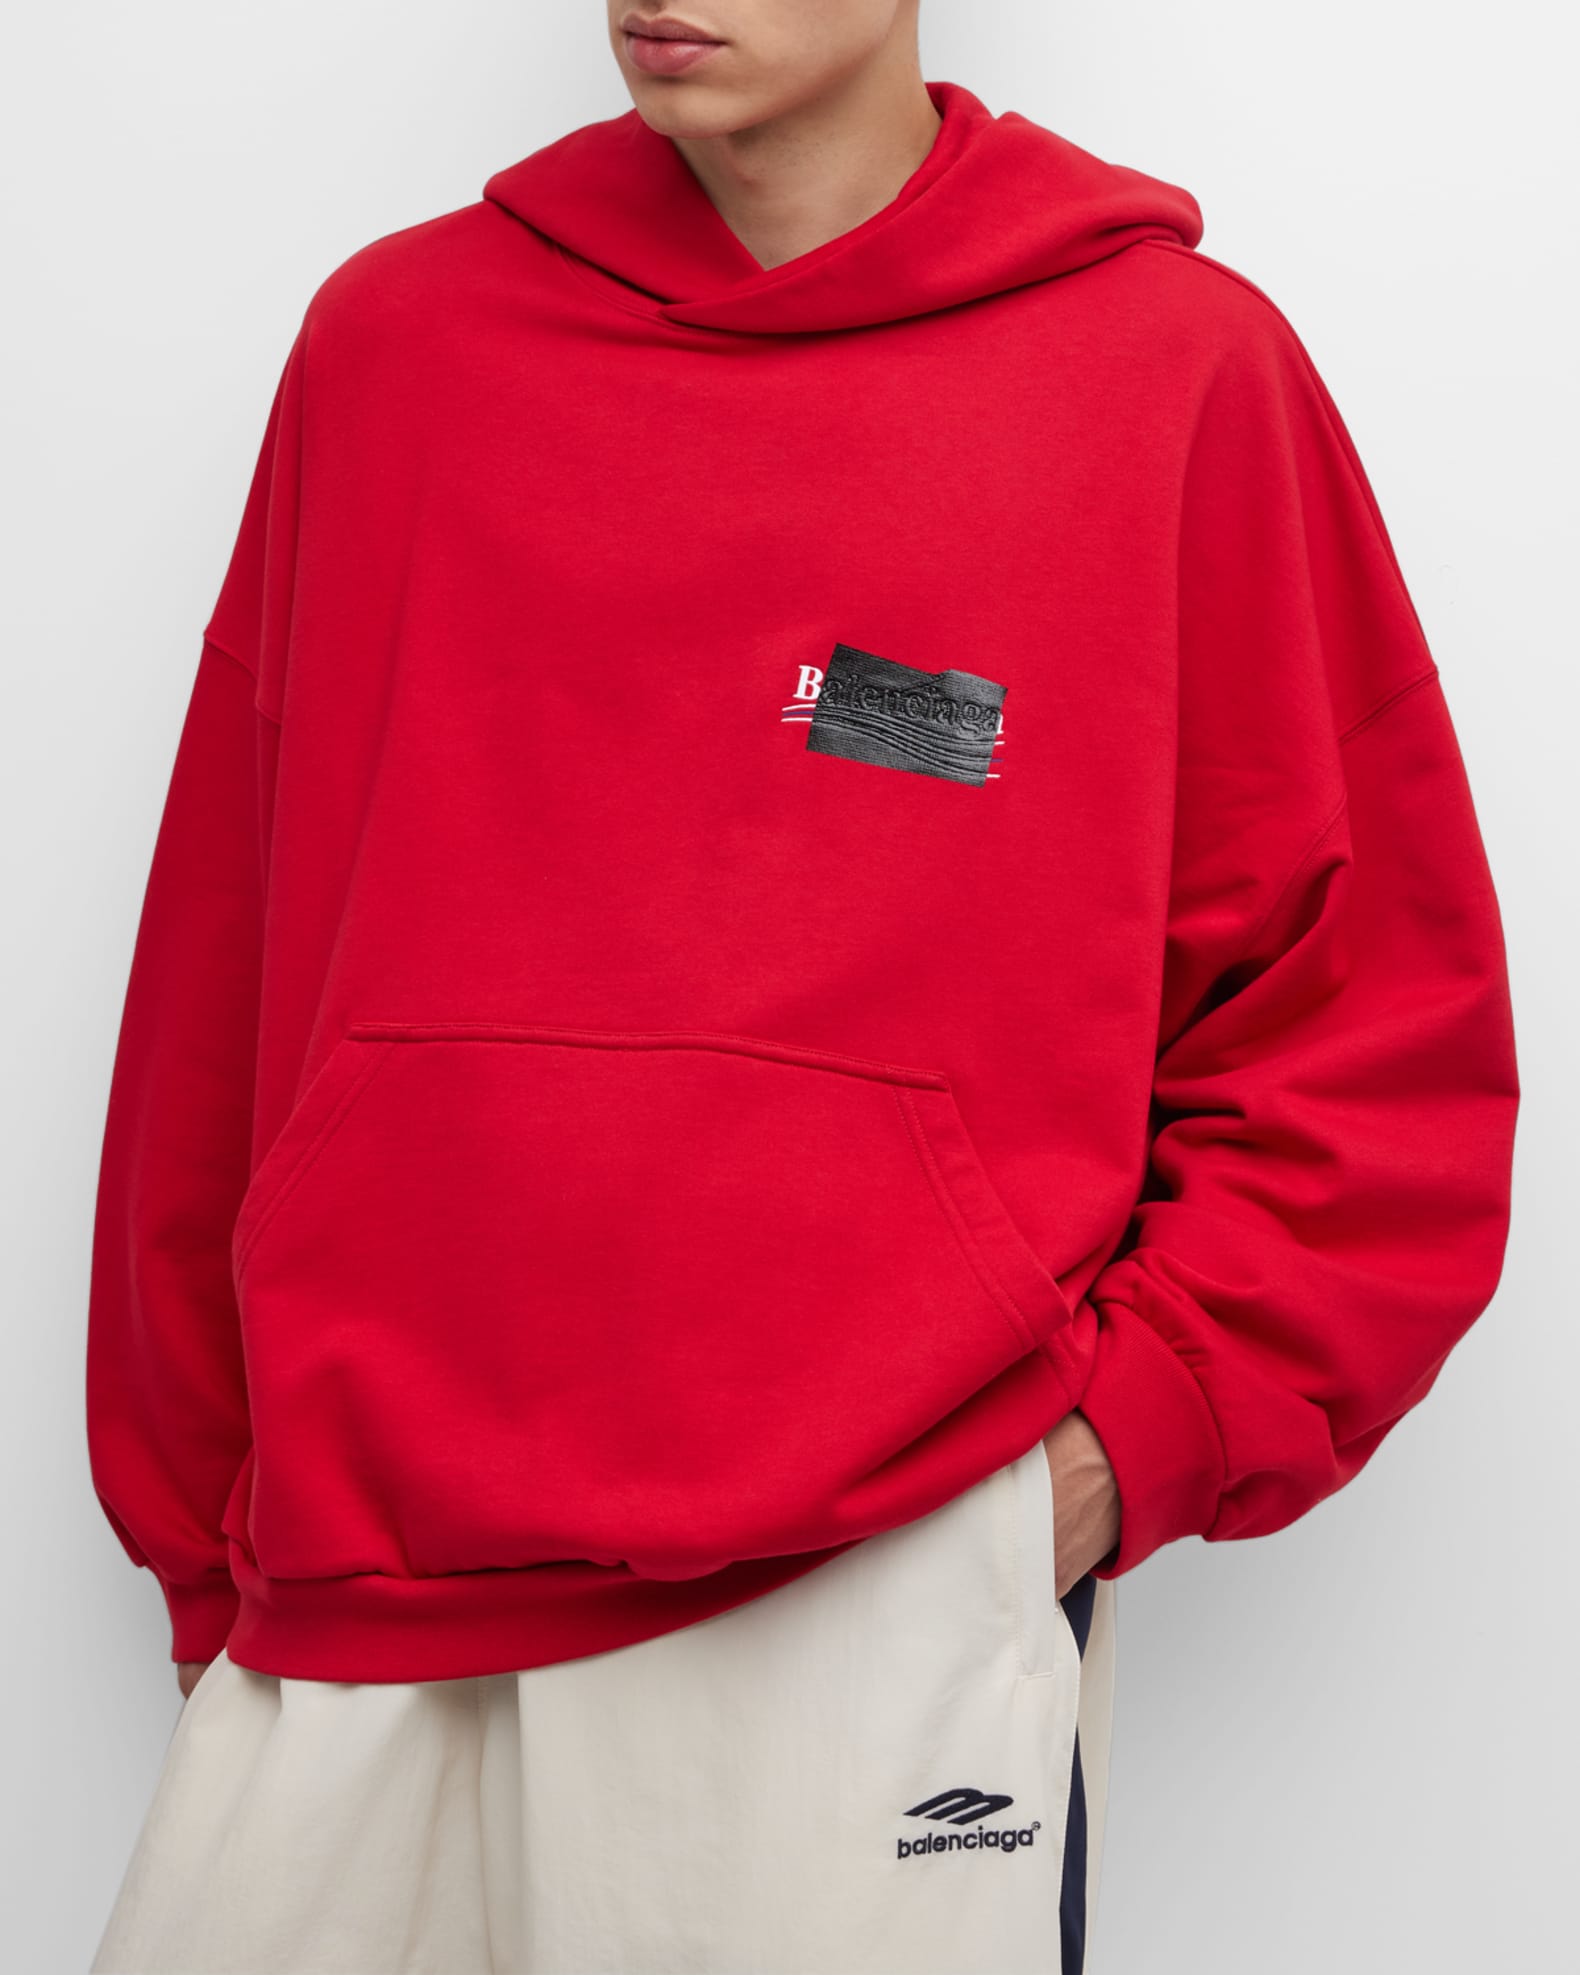 Men's Inside-out Oversized Hoodie by Vetements